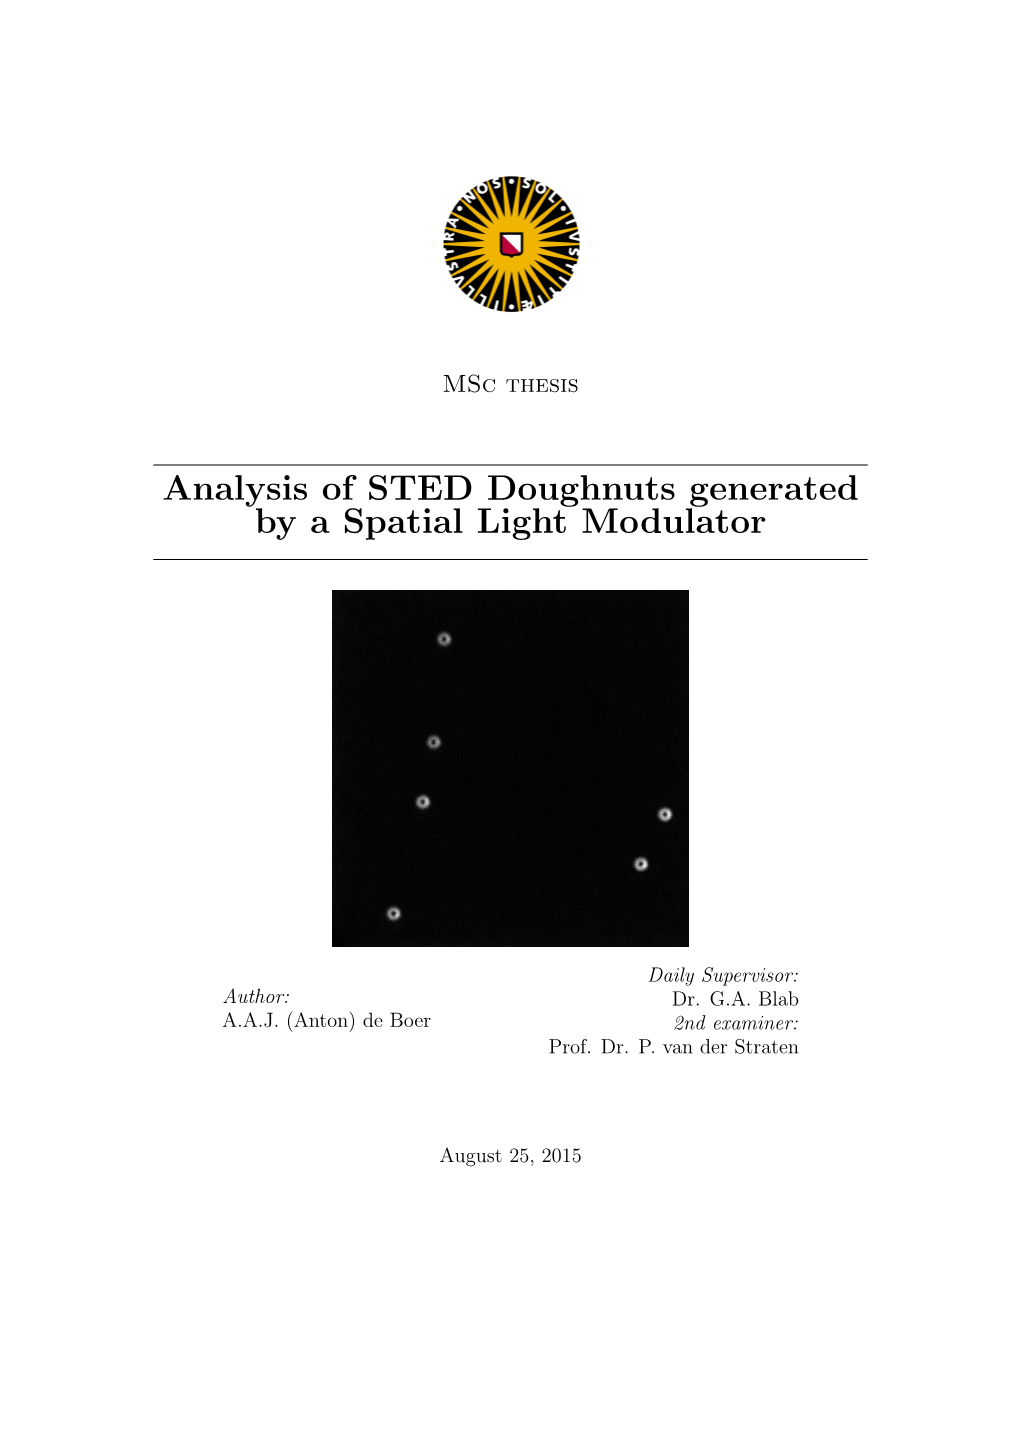 Analysis of STED Doughnuts Generated by a Spatial Light Modulator